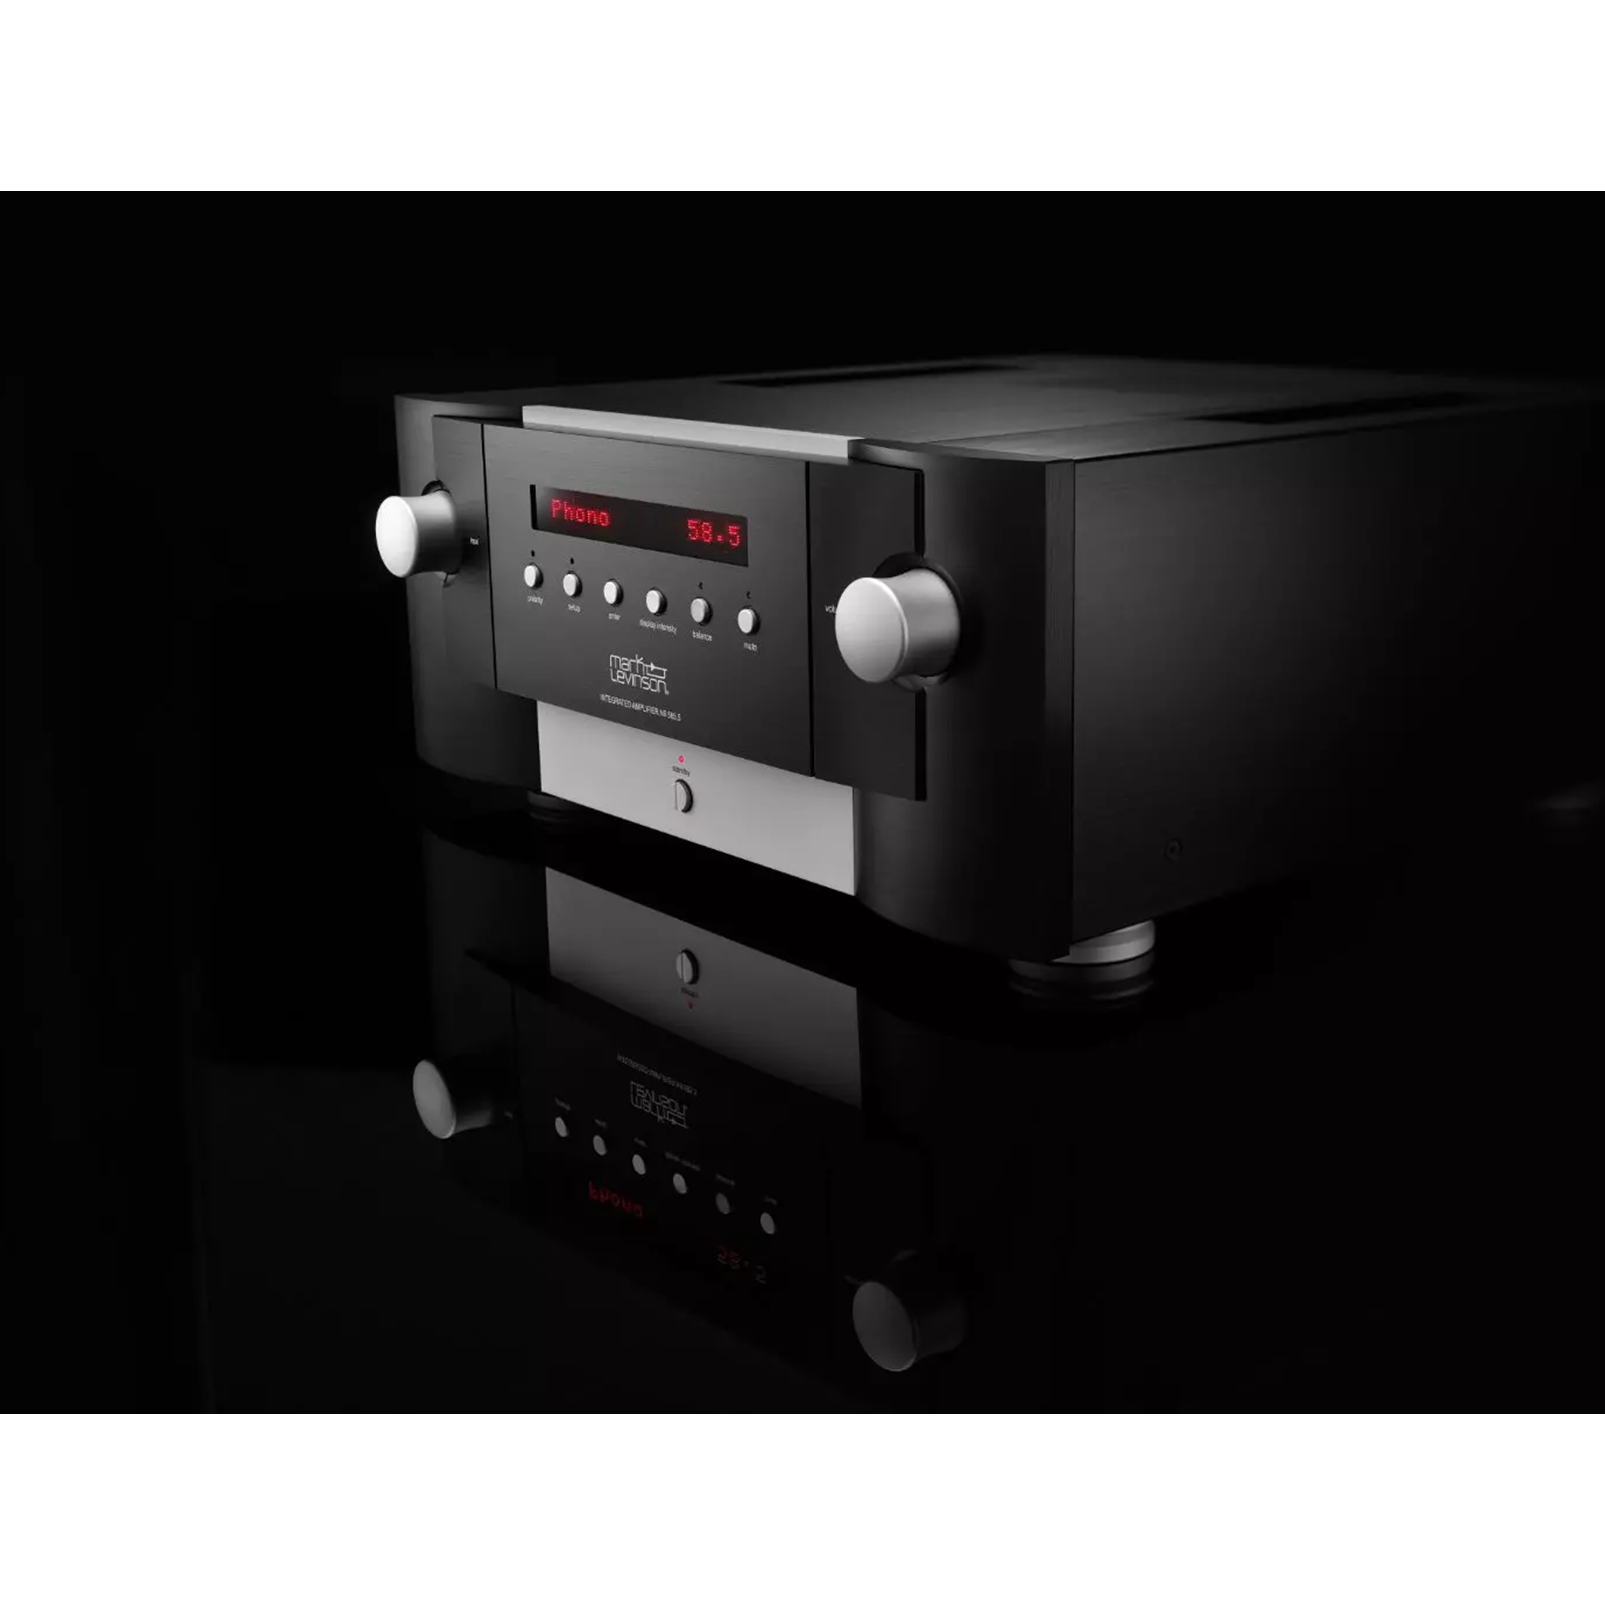 Nº585.5 - Black - Fully Discrete Integrated Amplifier with Class A Pure Phono Stage - Detailshot 8